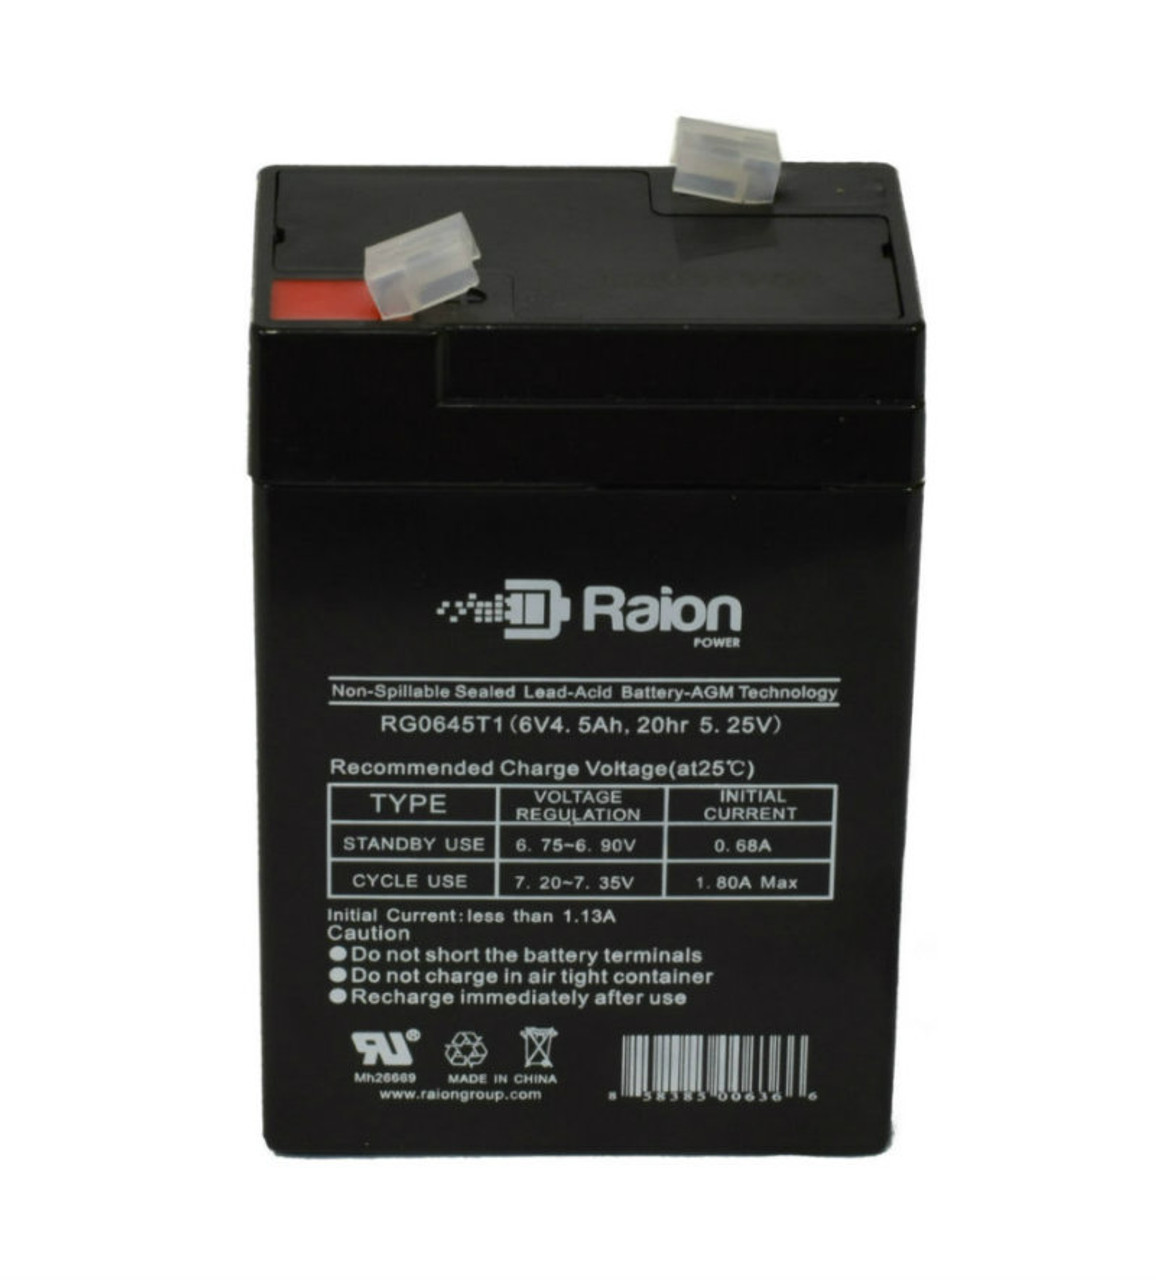 Raion Power RG0645T1 Replacement Battery Cartridge for Narada 3-FM-4